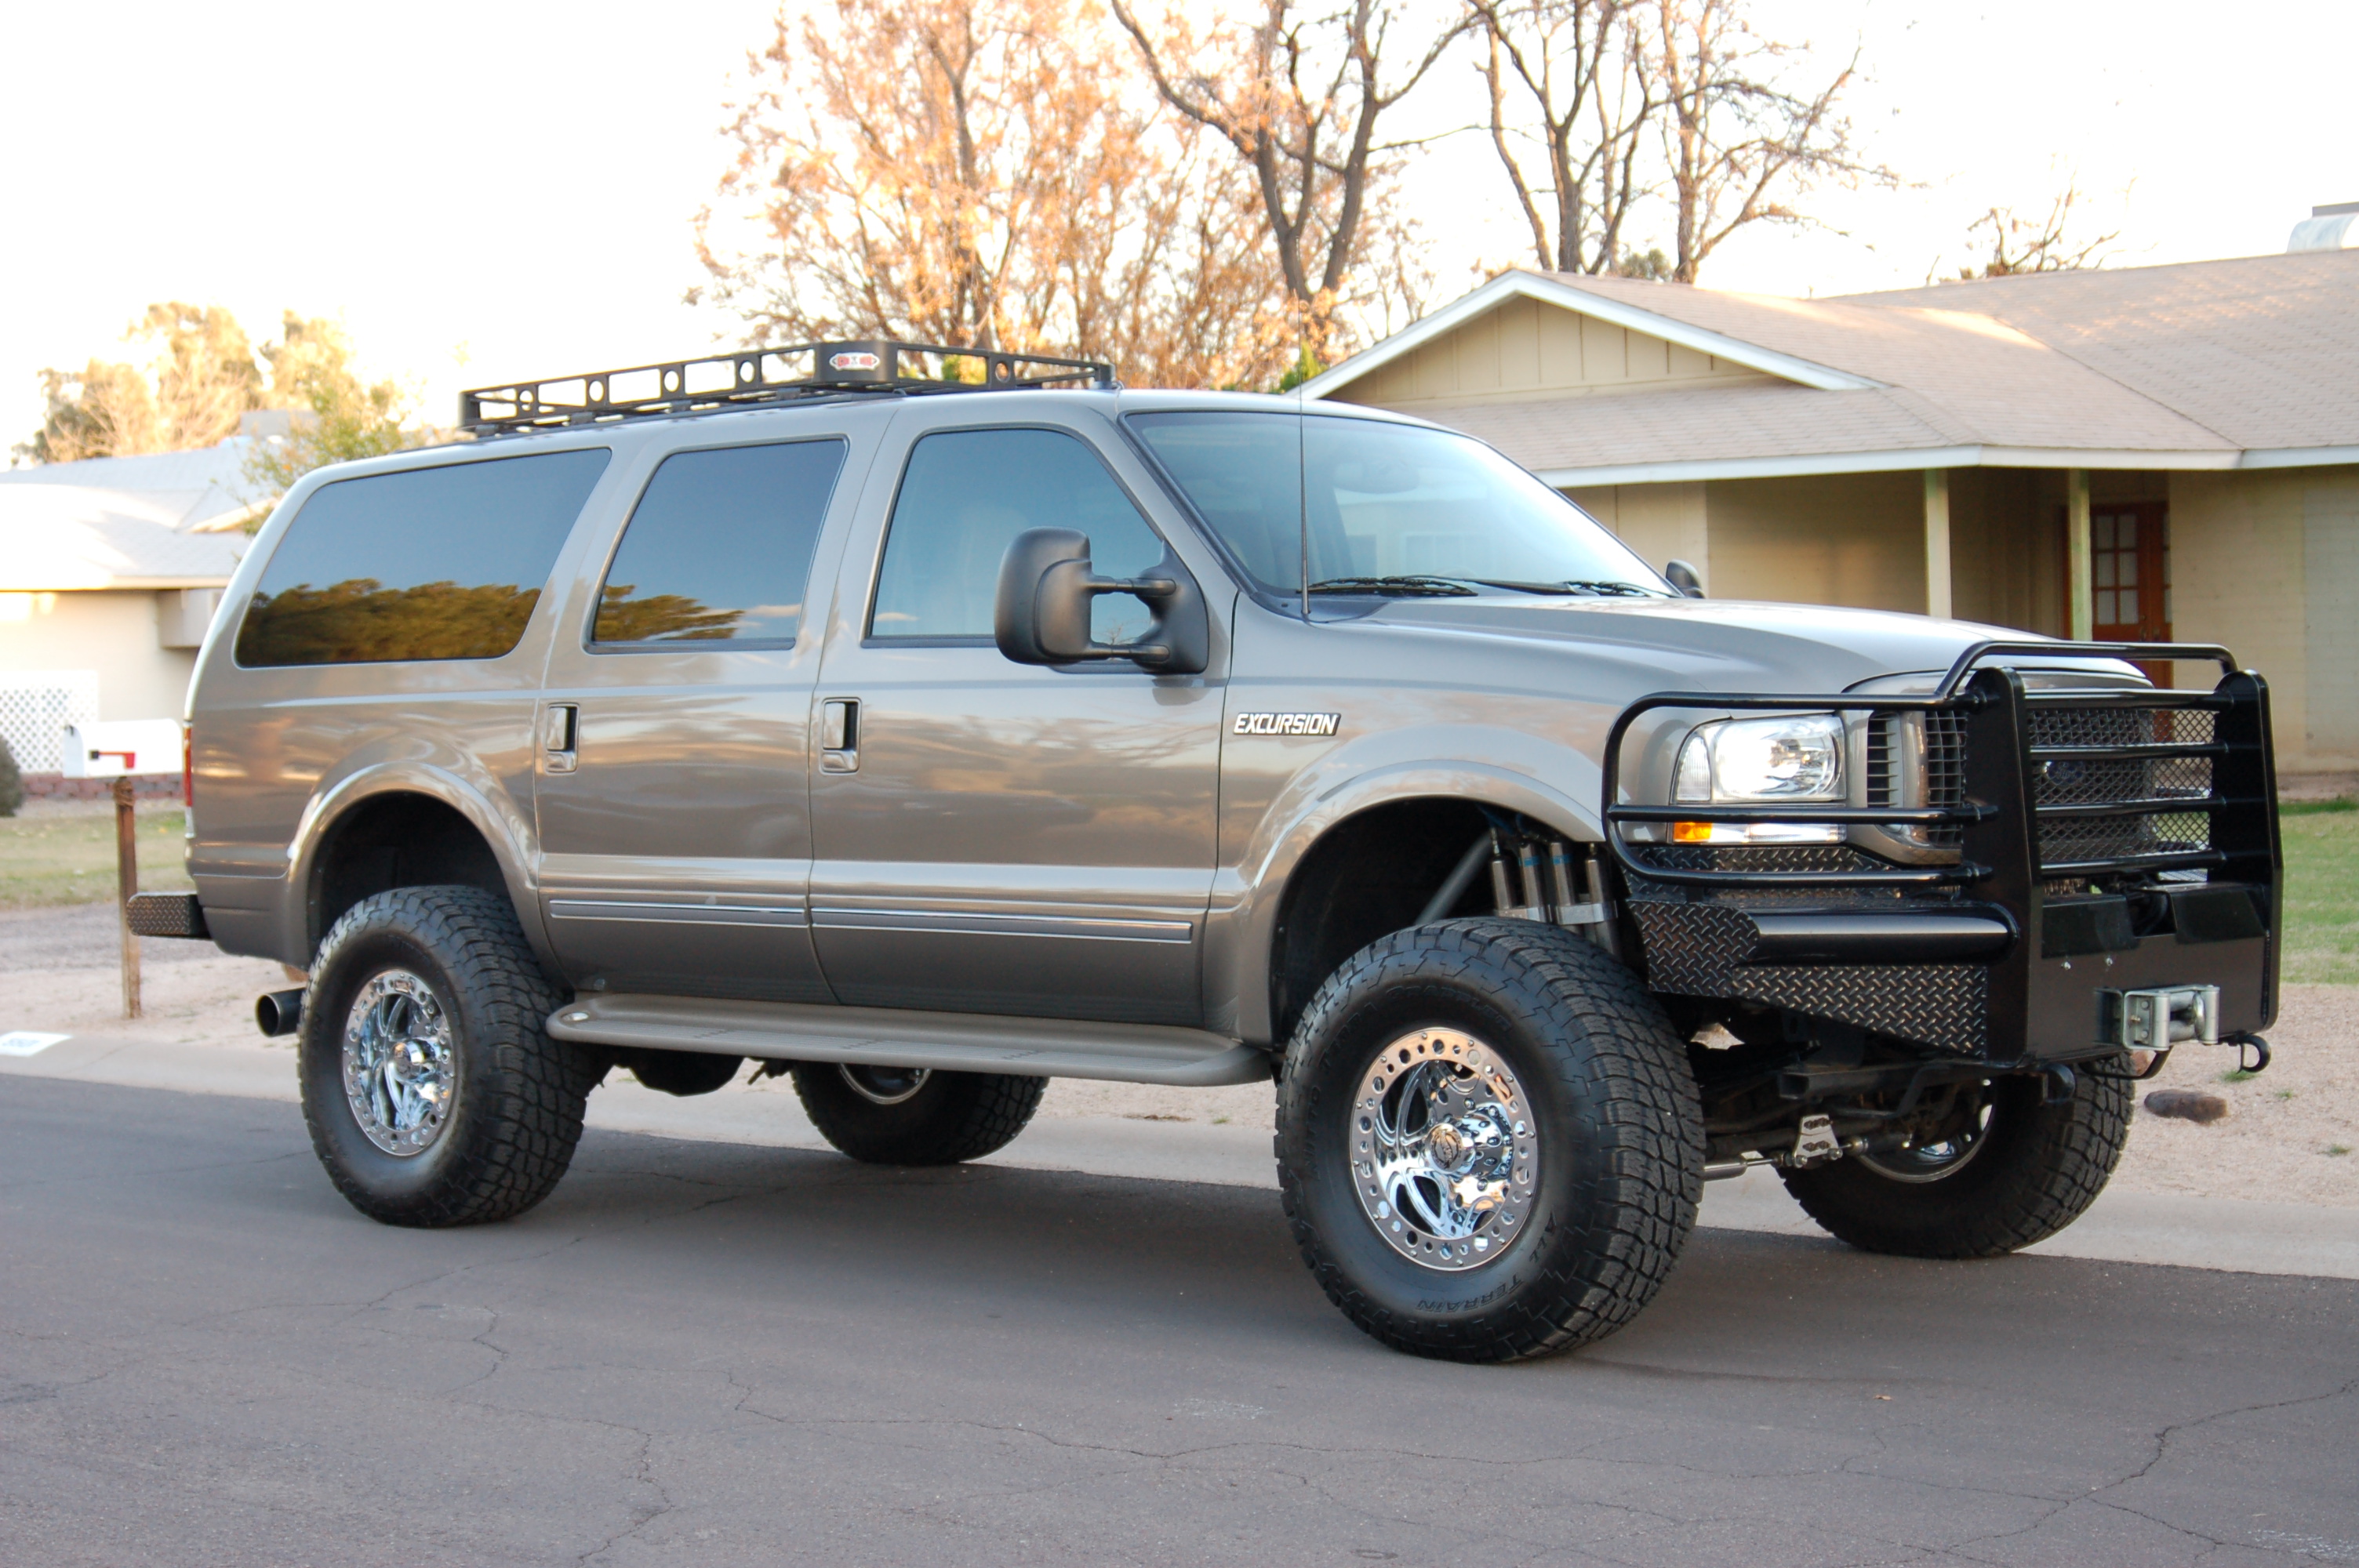 Ford Excursion #7.